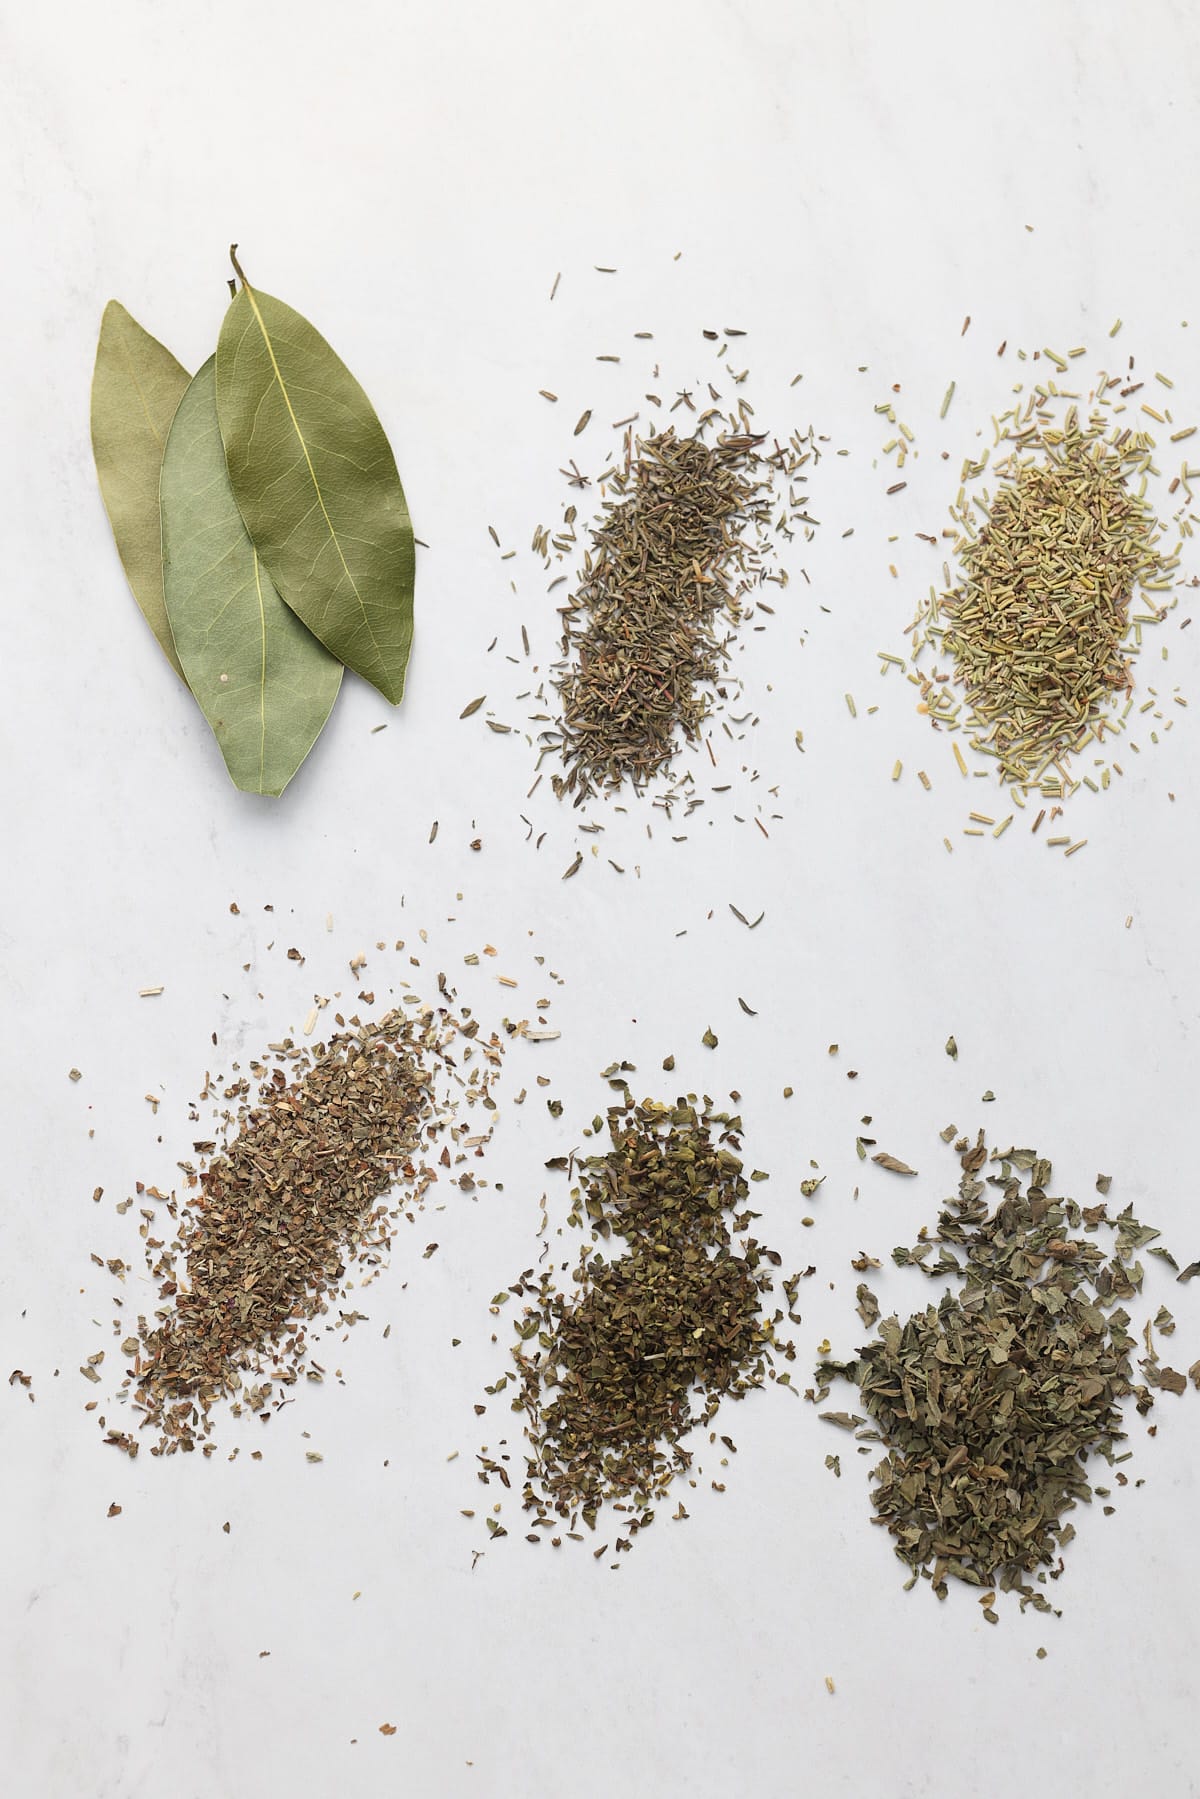 dried herbs on a white background